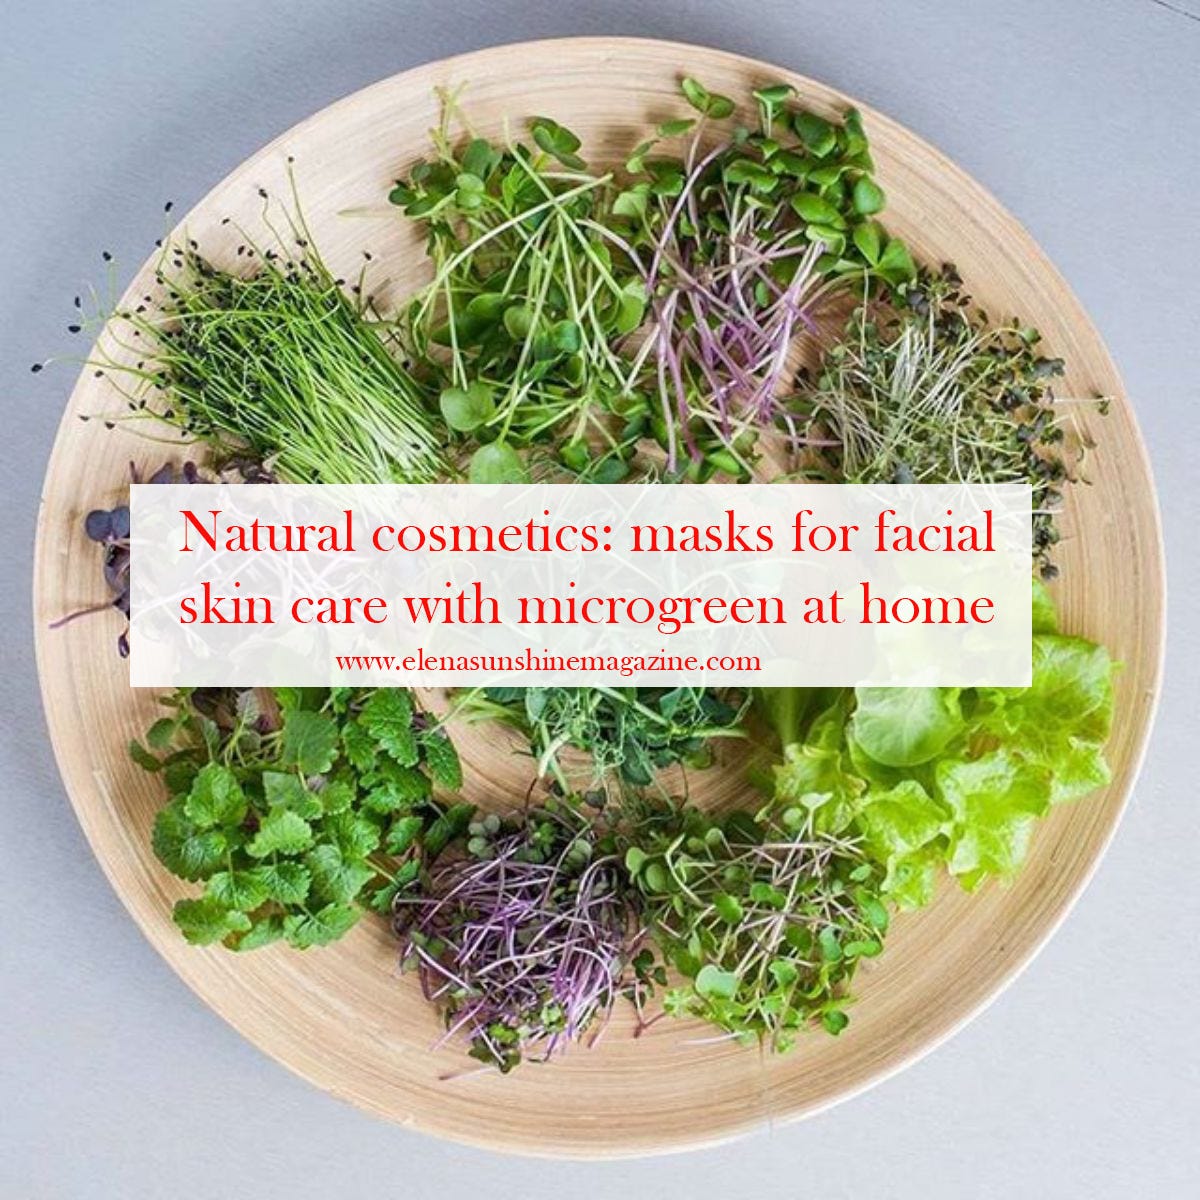 Natural cosmetics masks for facial skin care with microgreen at home by Elena photo